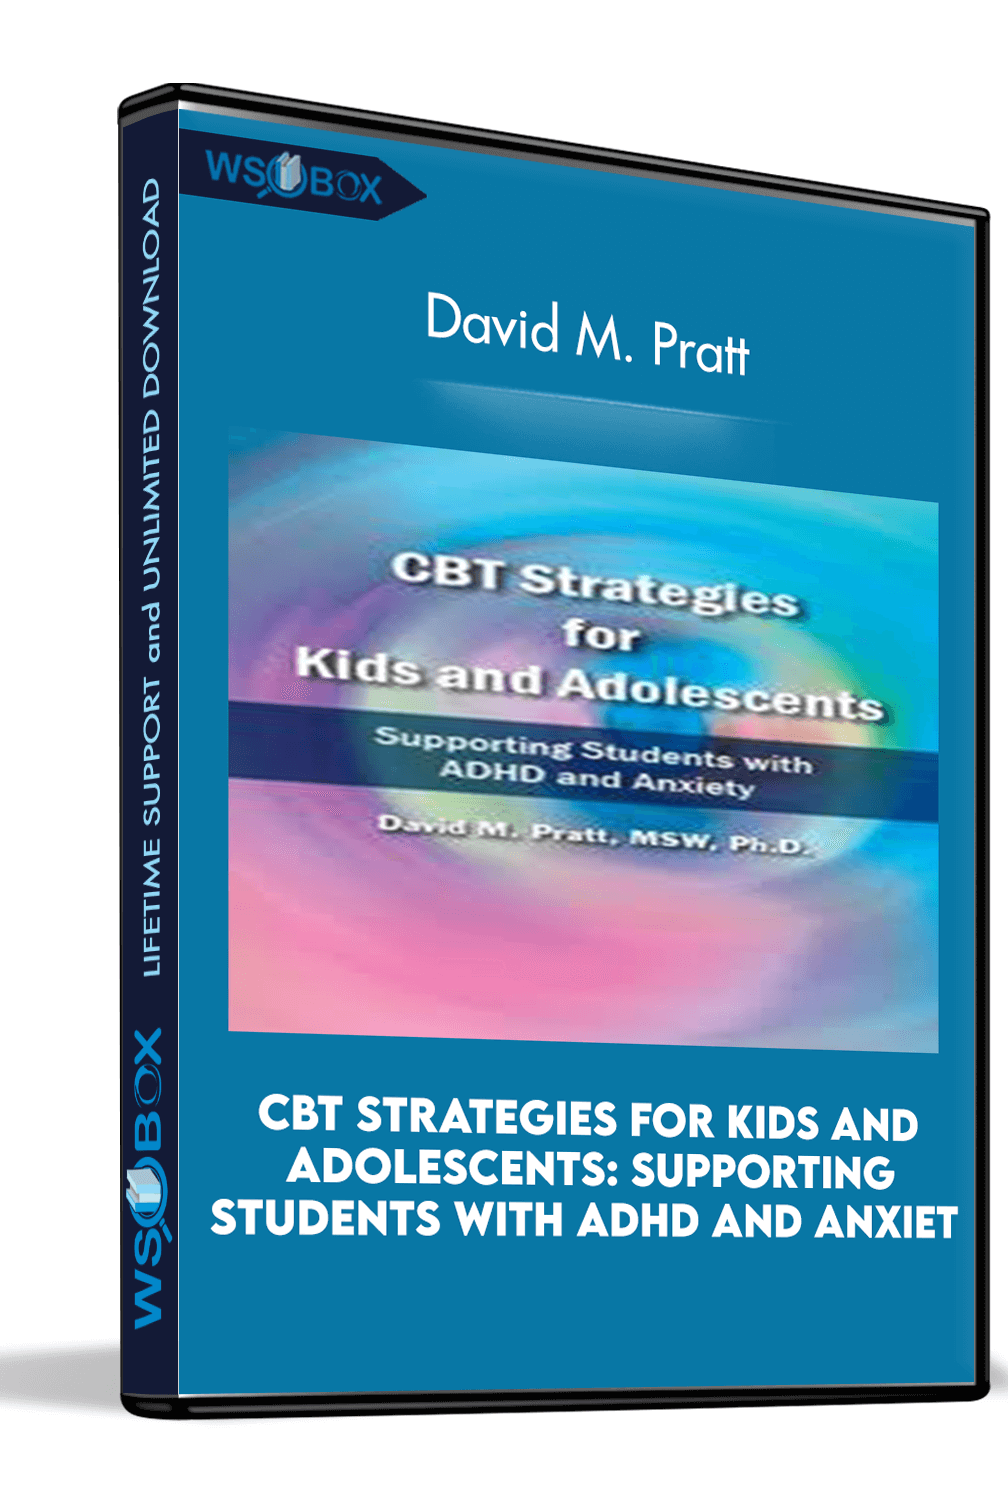 CBT Strategies for Kids and Adolescents: Supporting Students with ADHD and Anxiet – David M. Pratt